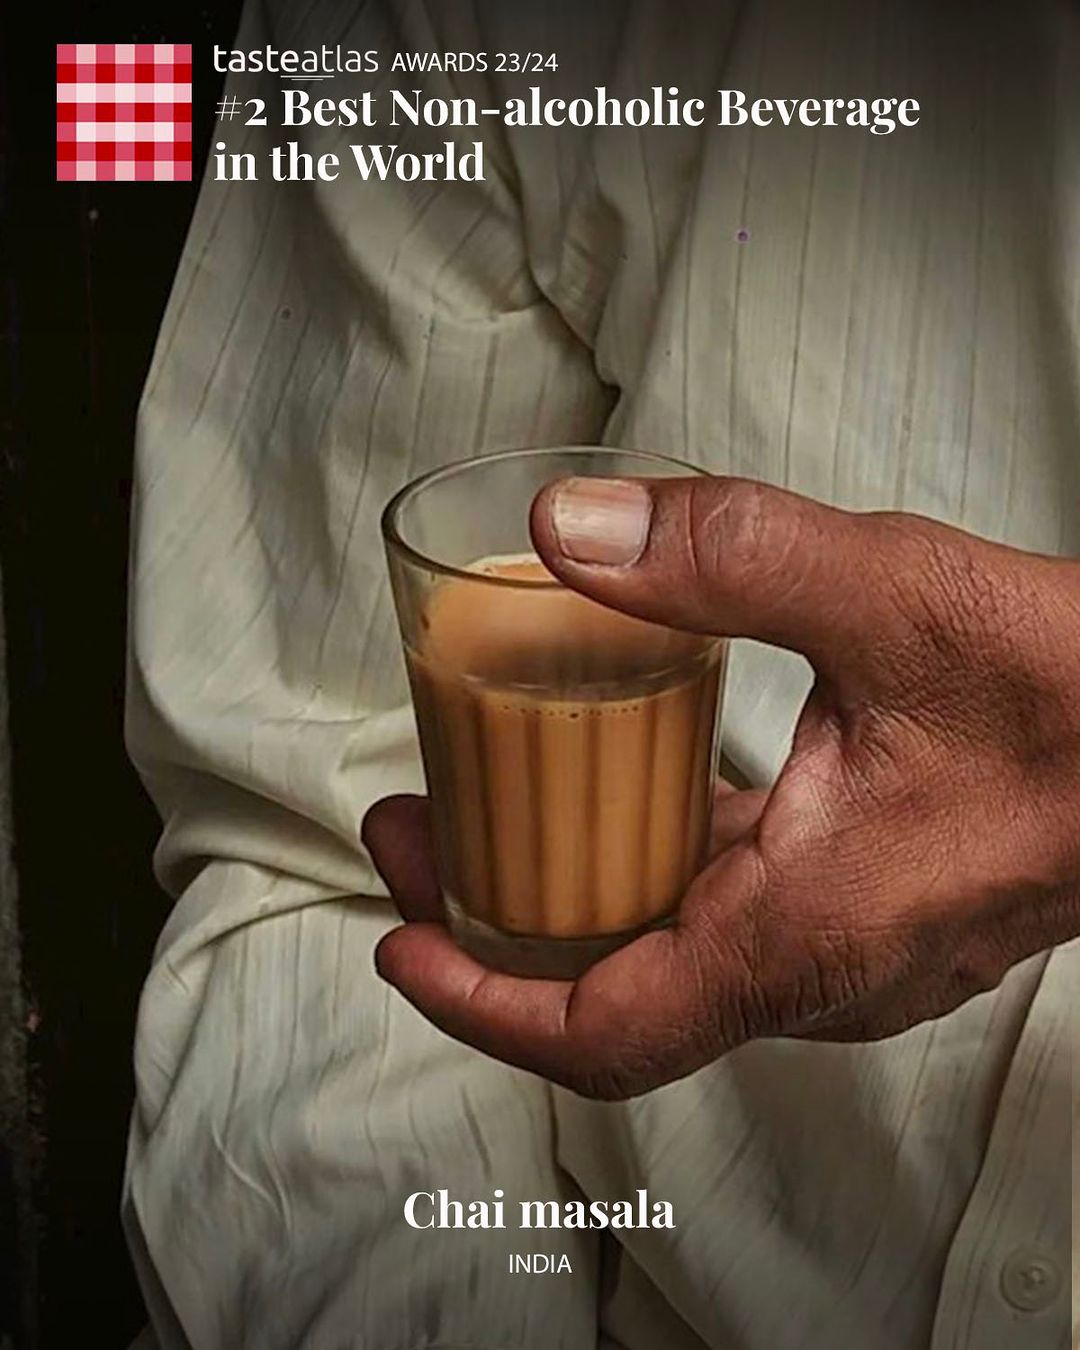 Masala Chai grabs 2nd spot as Best Non-Alcoholic Beverage globally